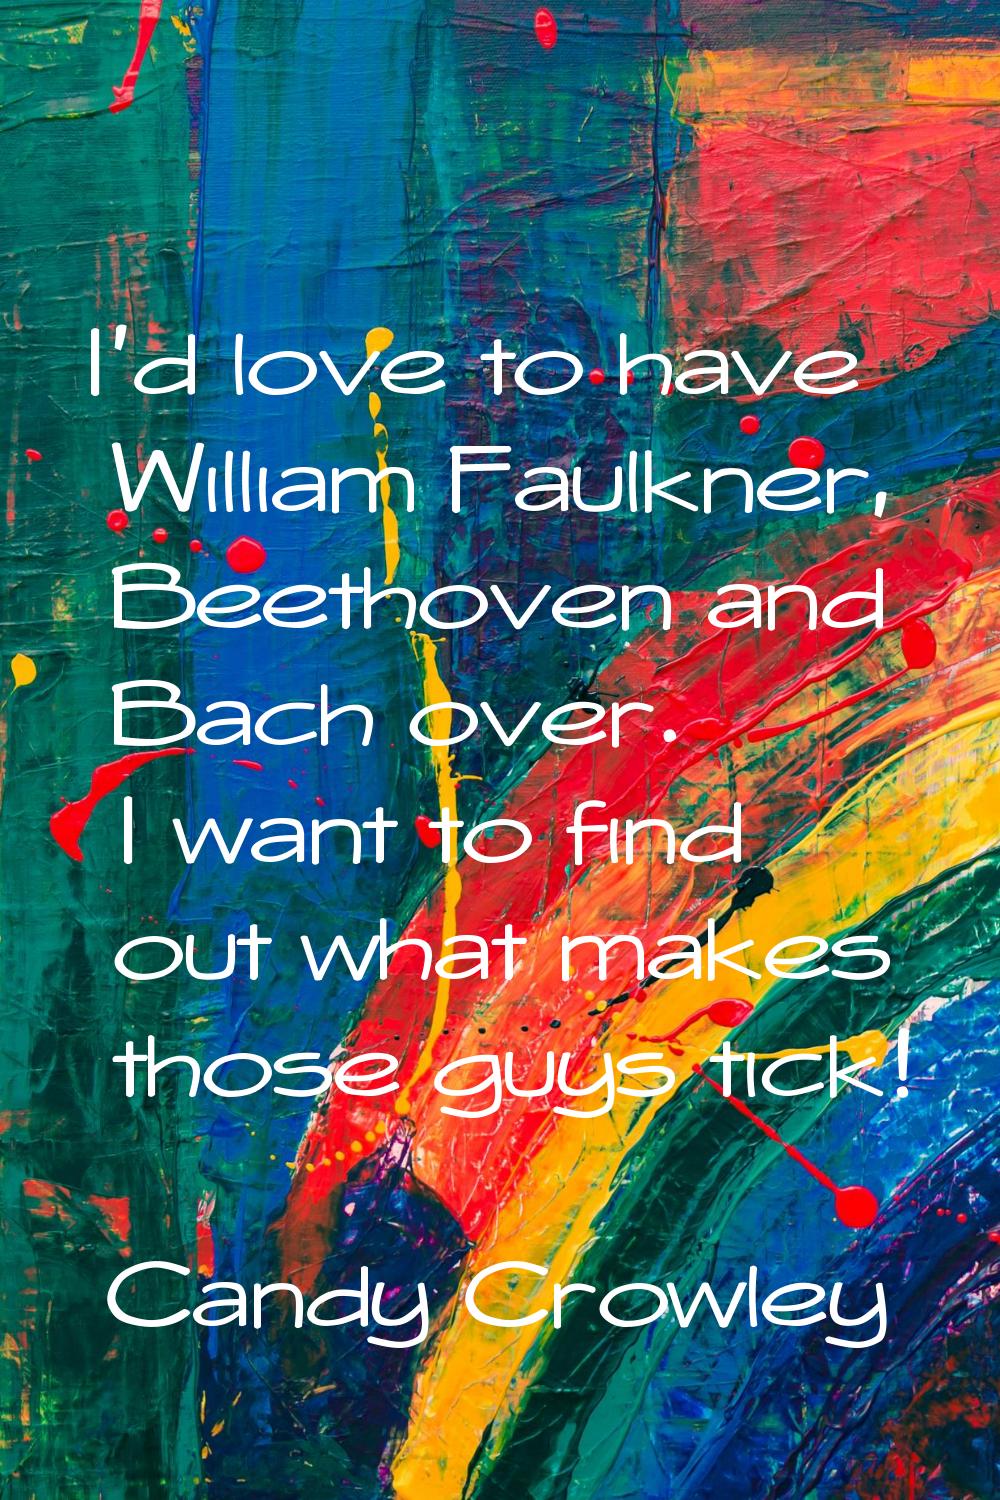 I'd love to have William Faulkner, Beethoven and Bach over. I want to find out what makes those guy